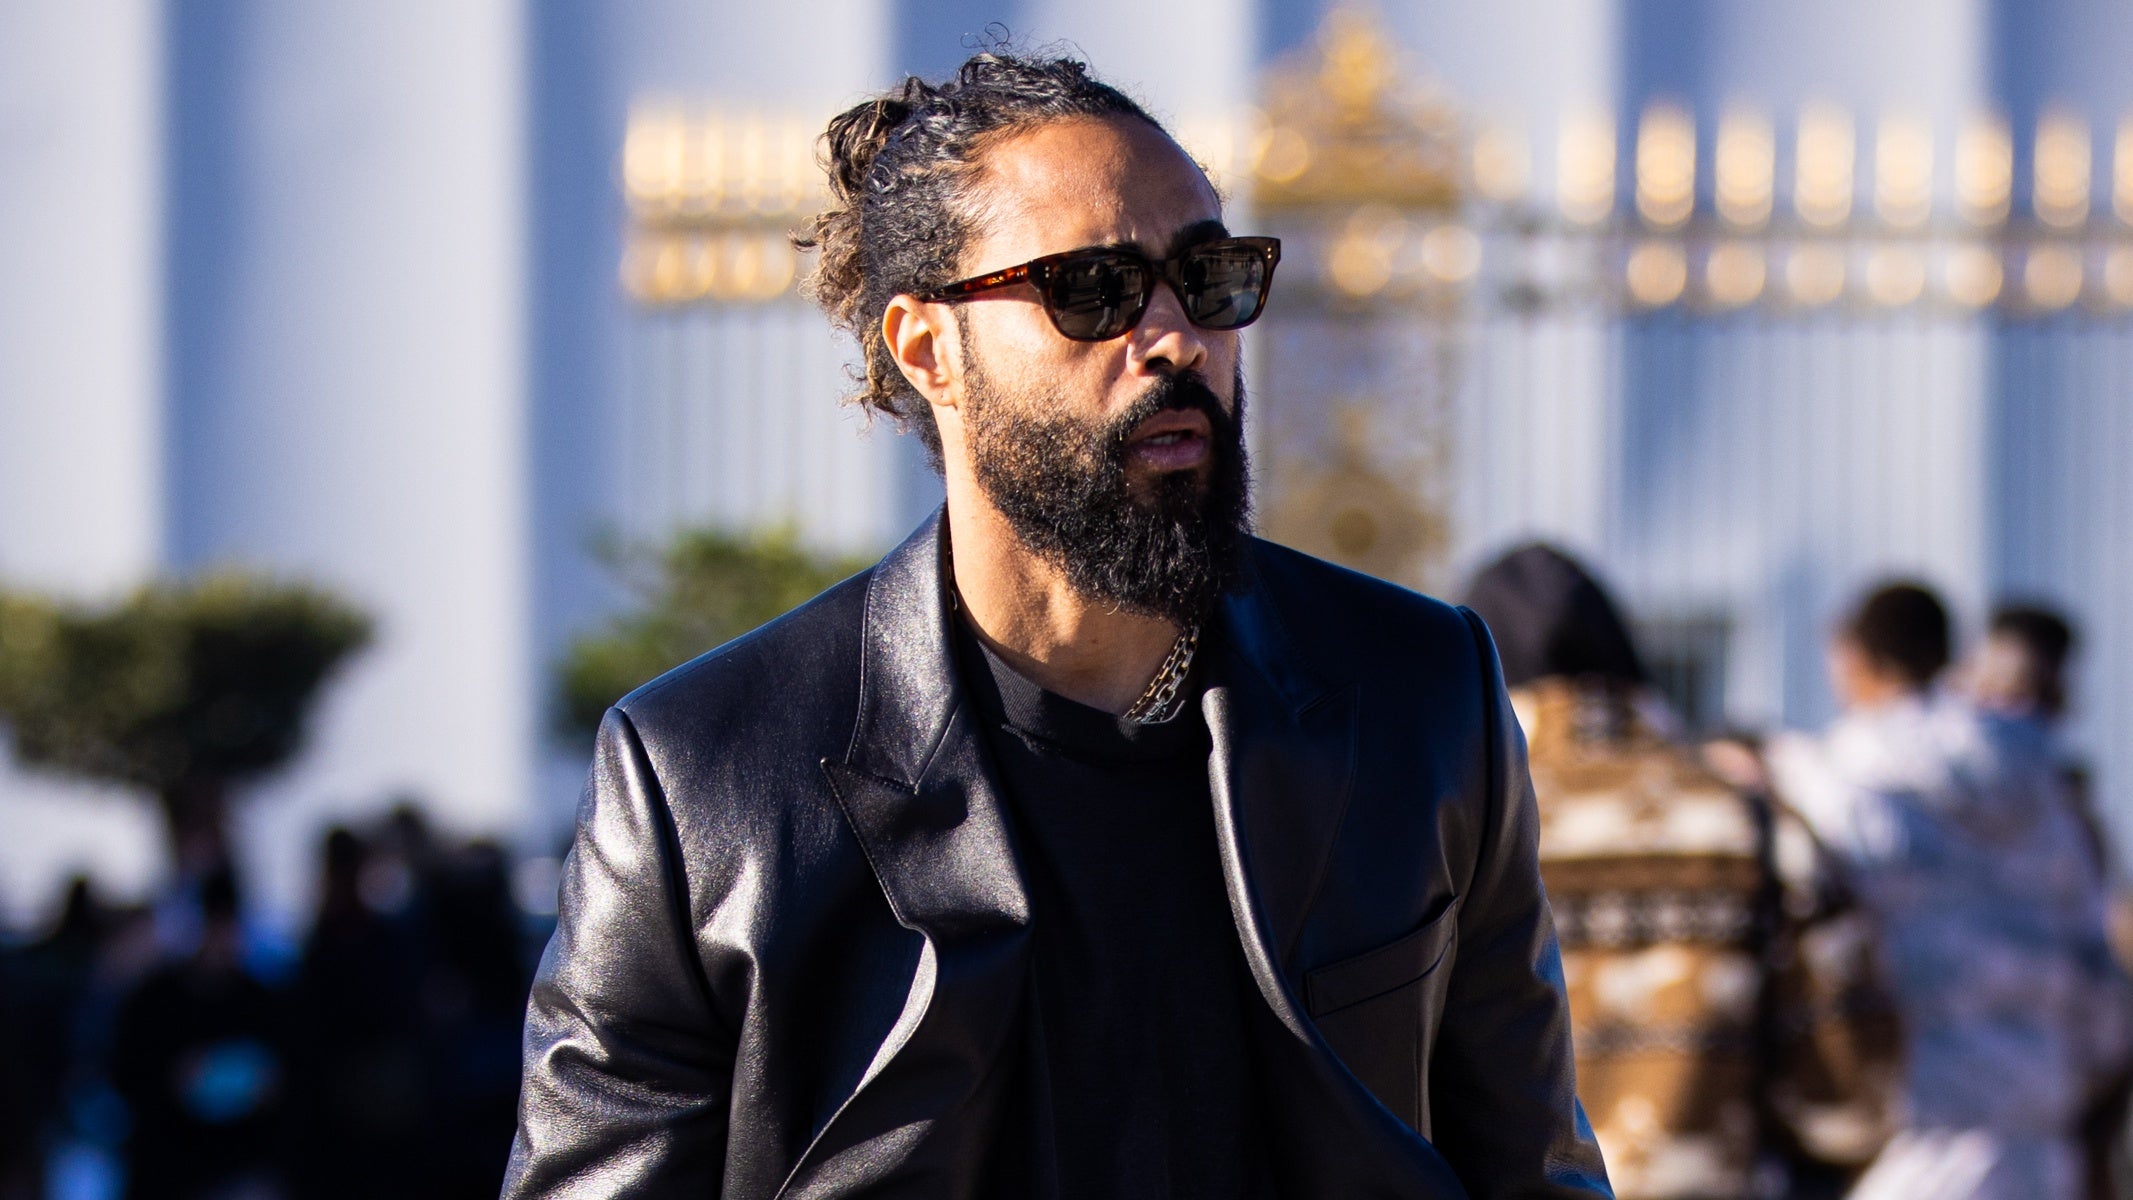 Jerry Lorenzo Calls Out White Privilege In Response To Attack On Capitol